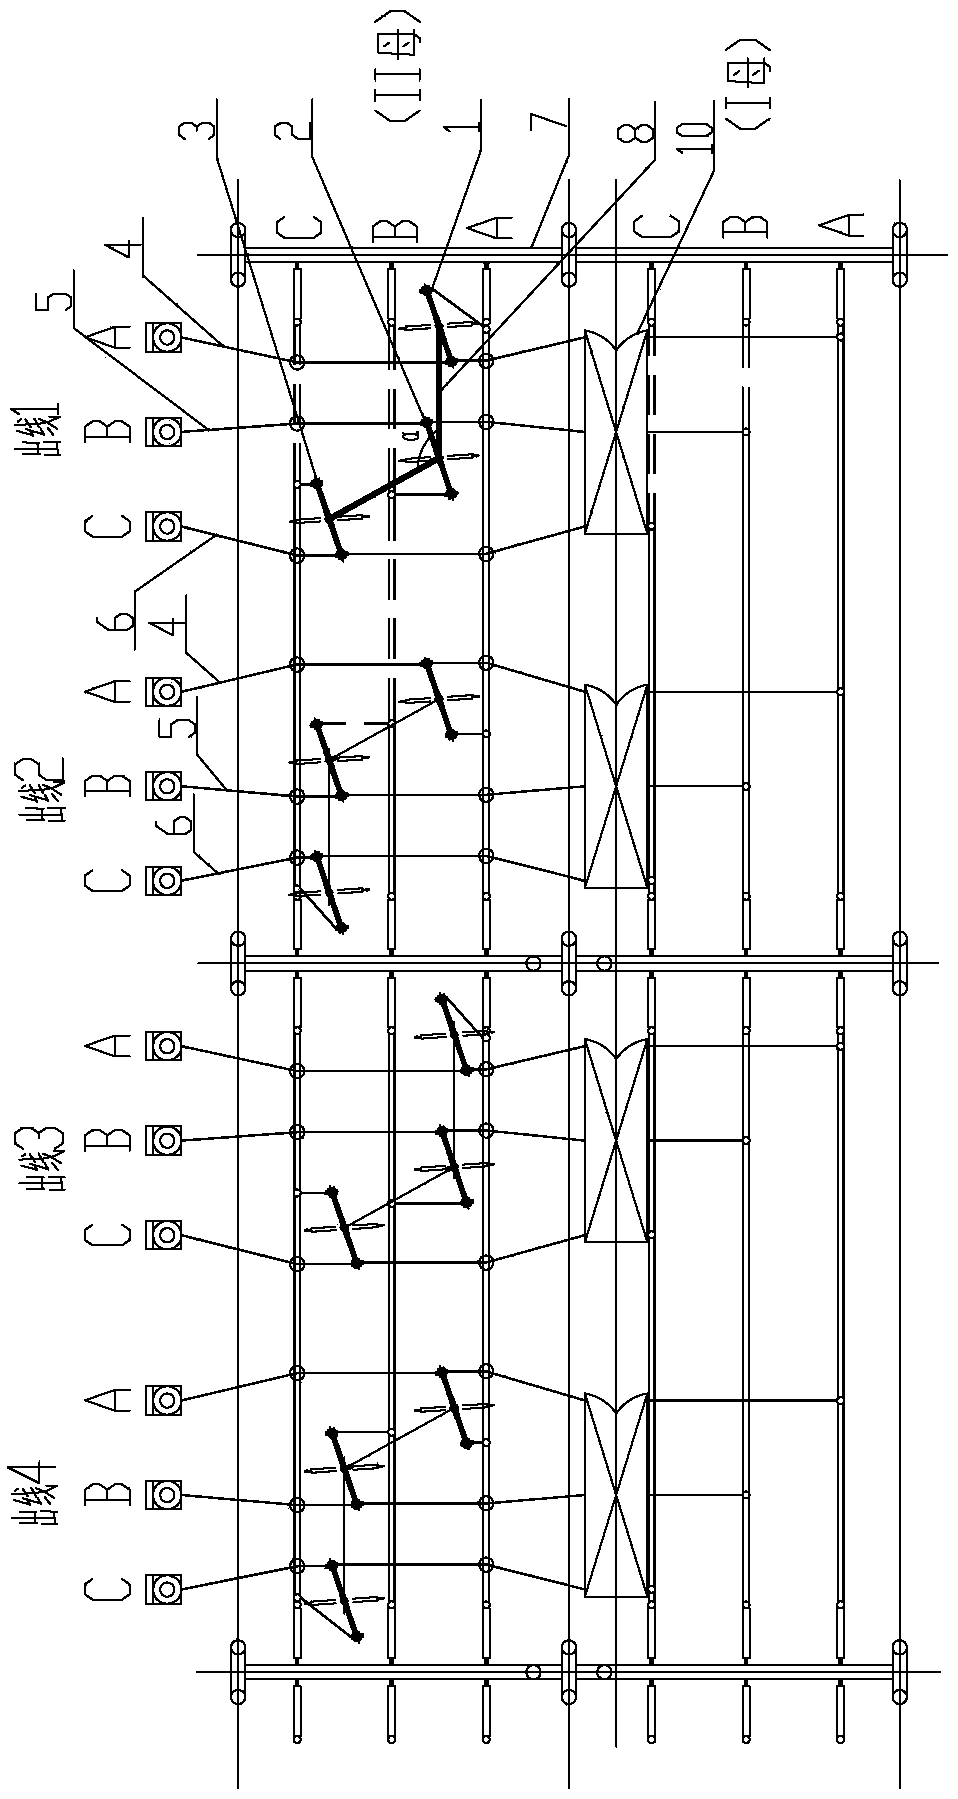 Arrangement structure of high voltage isolating switch in substation